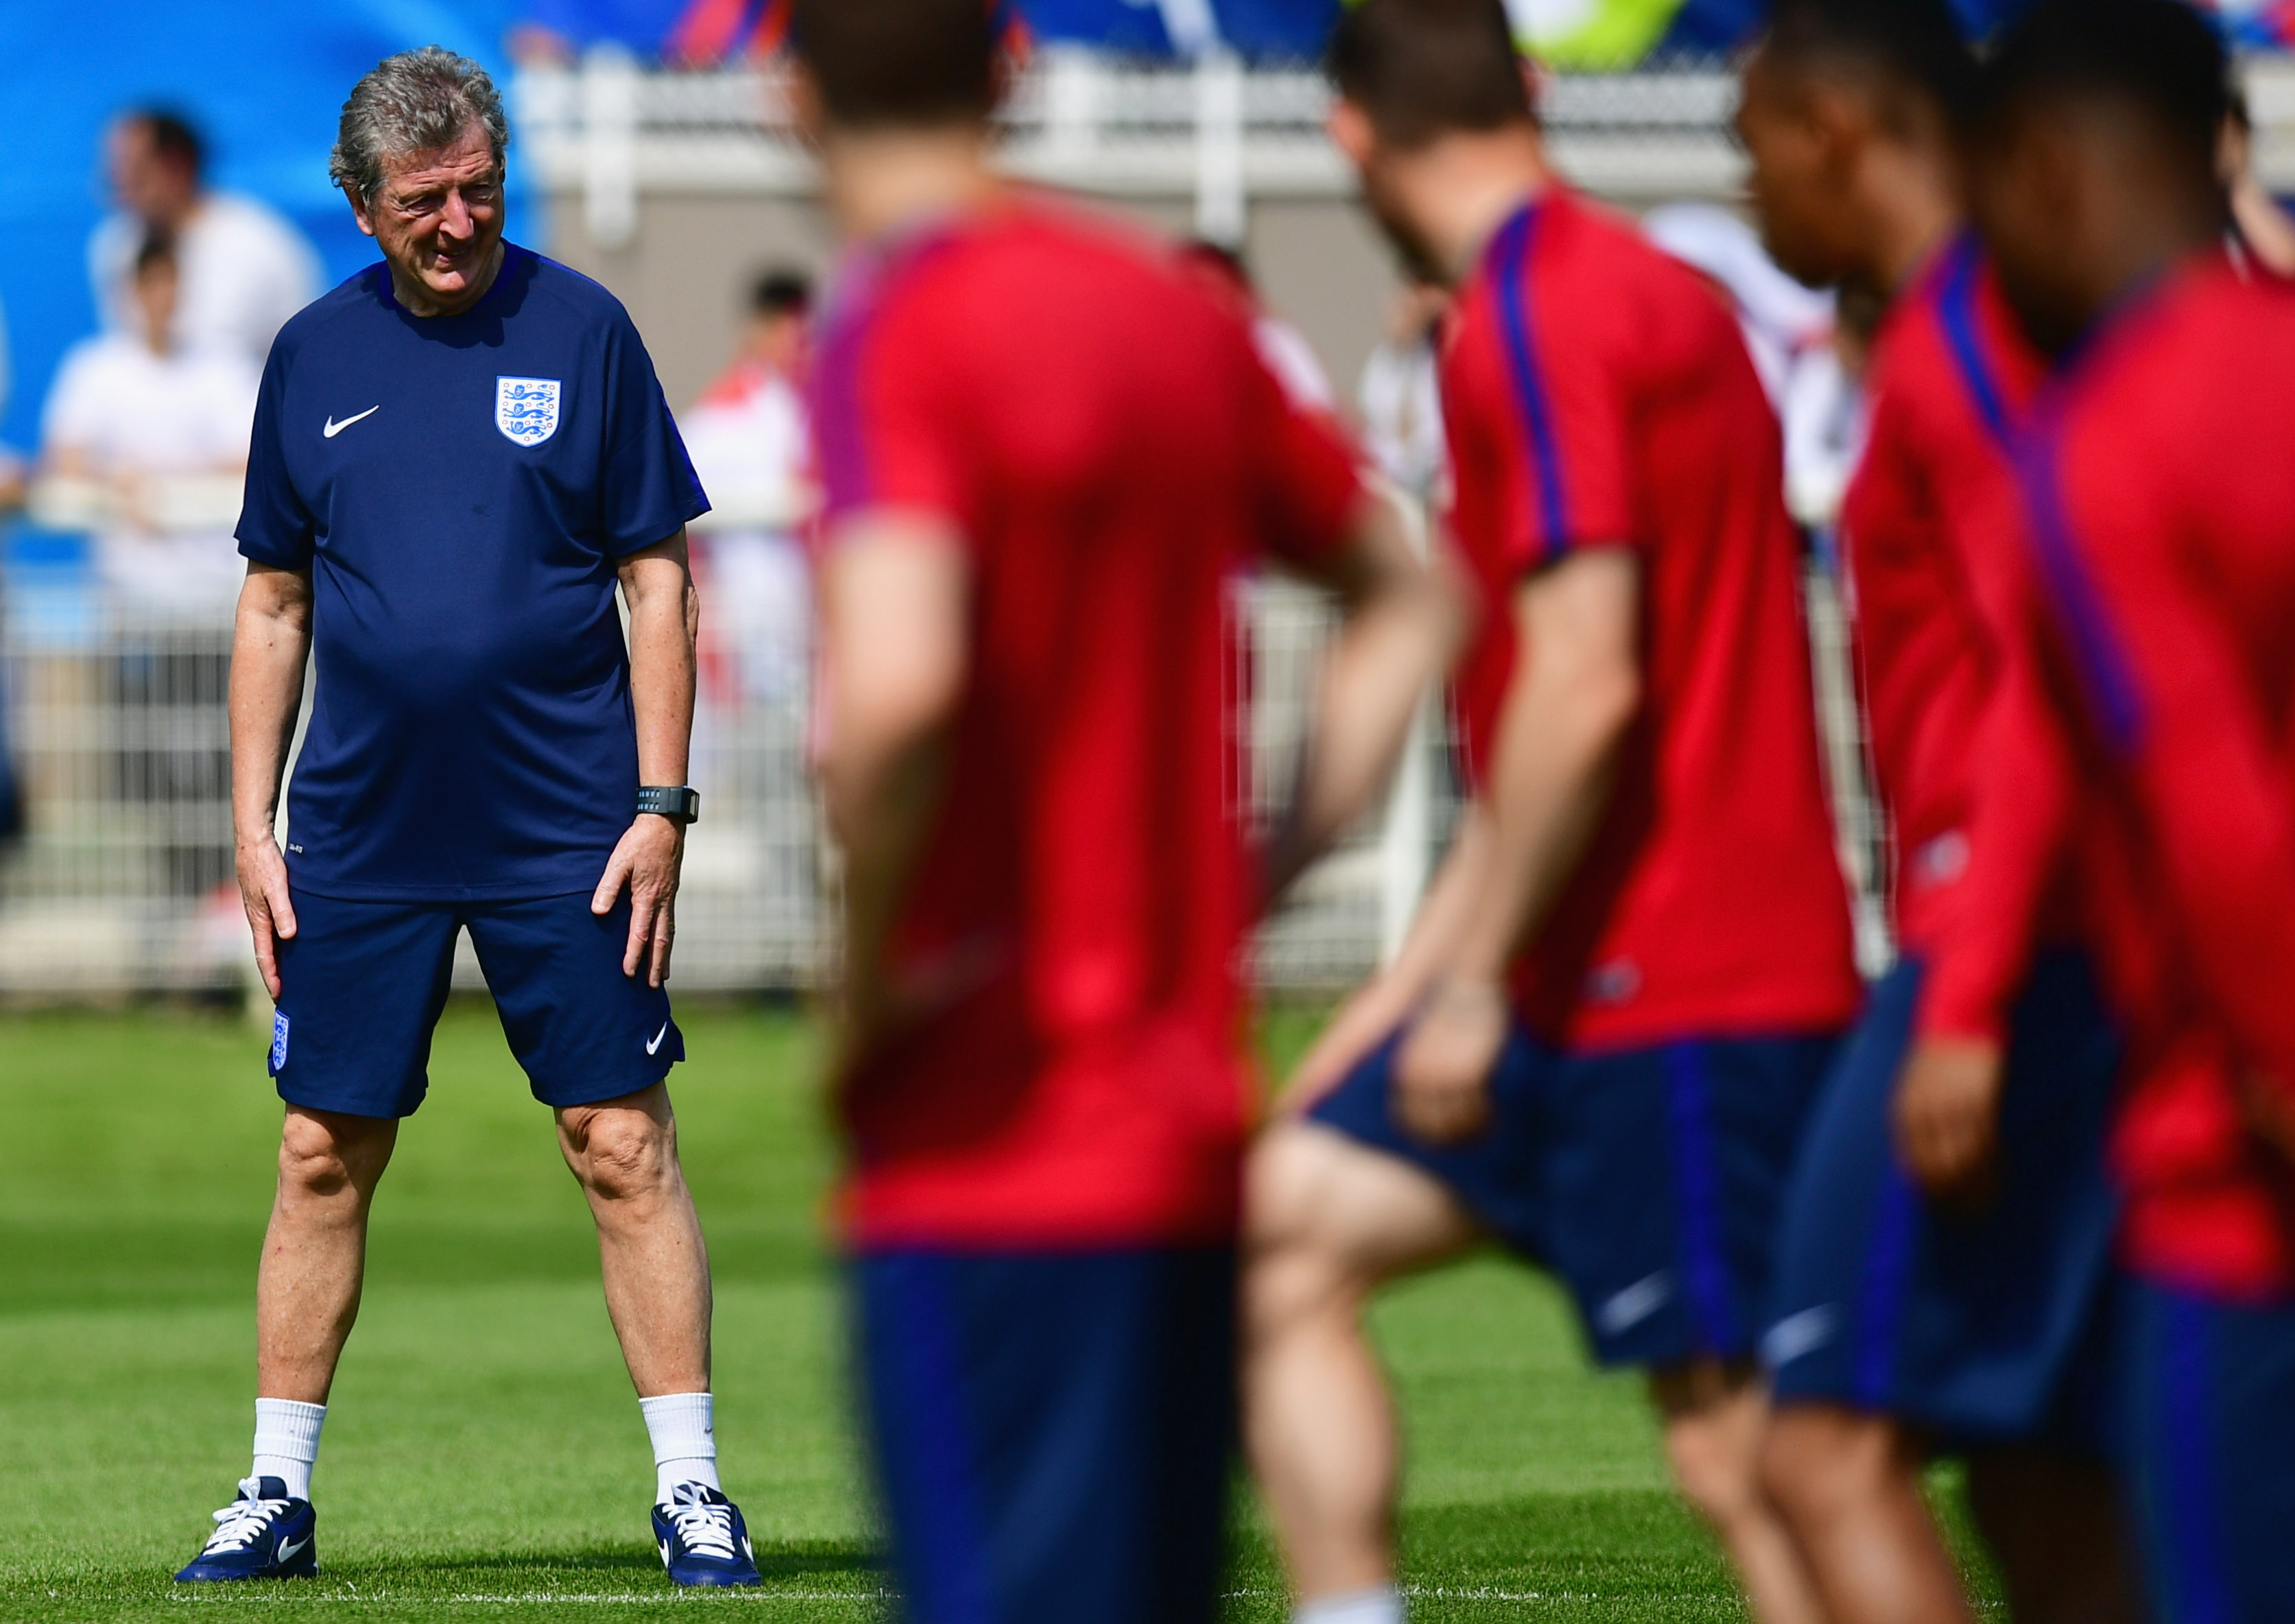 Euro 2016 | 7 bold predictions with England to do well, no France/Germany in final